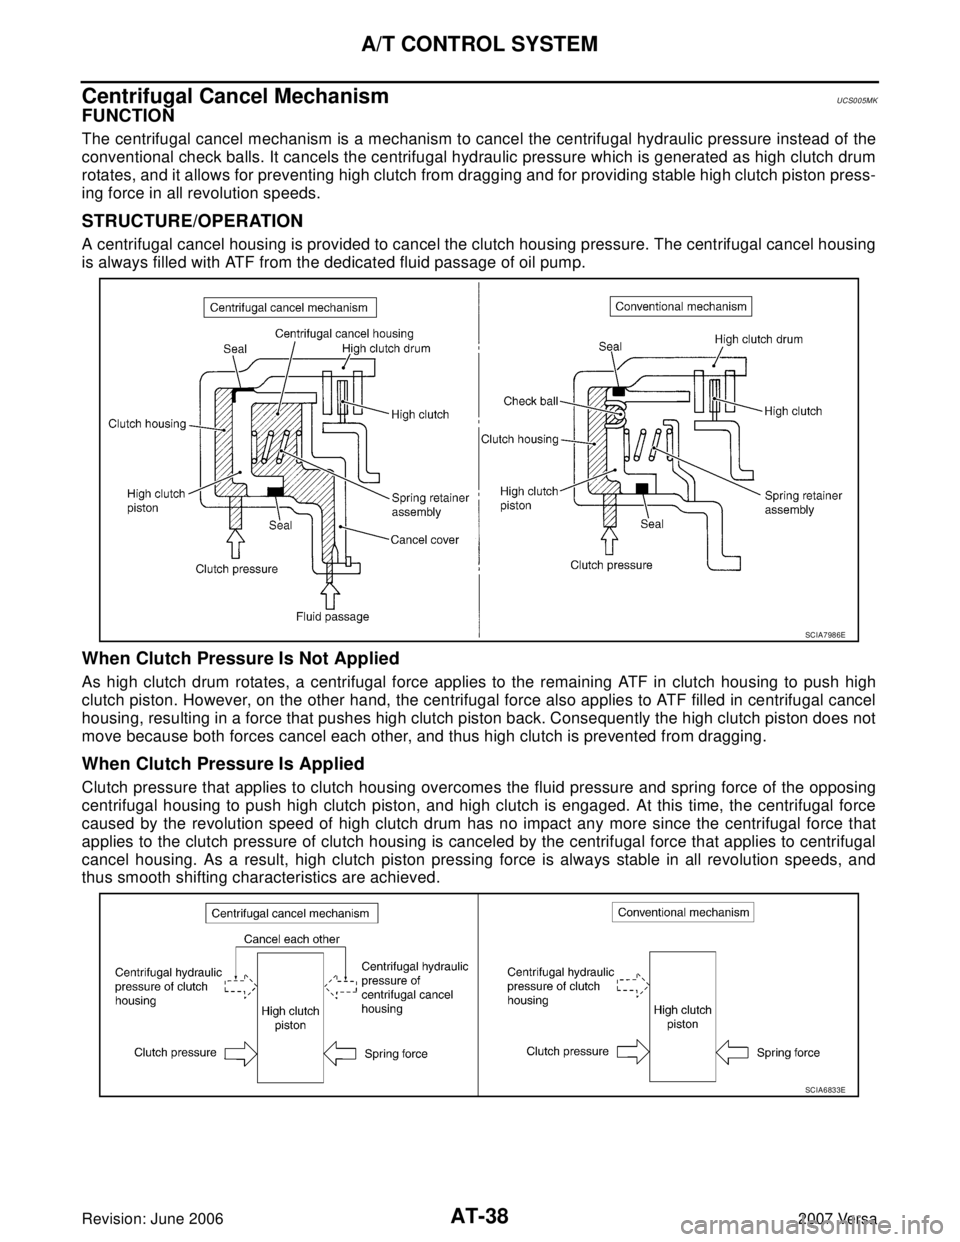 NISSAN VERSA 2006  Workshop  Service Repair Manual AT-38
A/T CONTROL SYSTEM
Revision: June 20062007 Versa
Centrifugal Cancel MechanismUCS005MK
FUNCTION
The centrifugal cancel mechanism is a mechanism to cancel the centrifugal hydraulic pressure instea